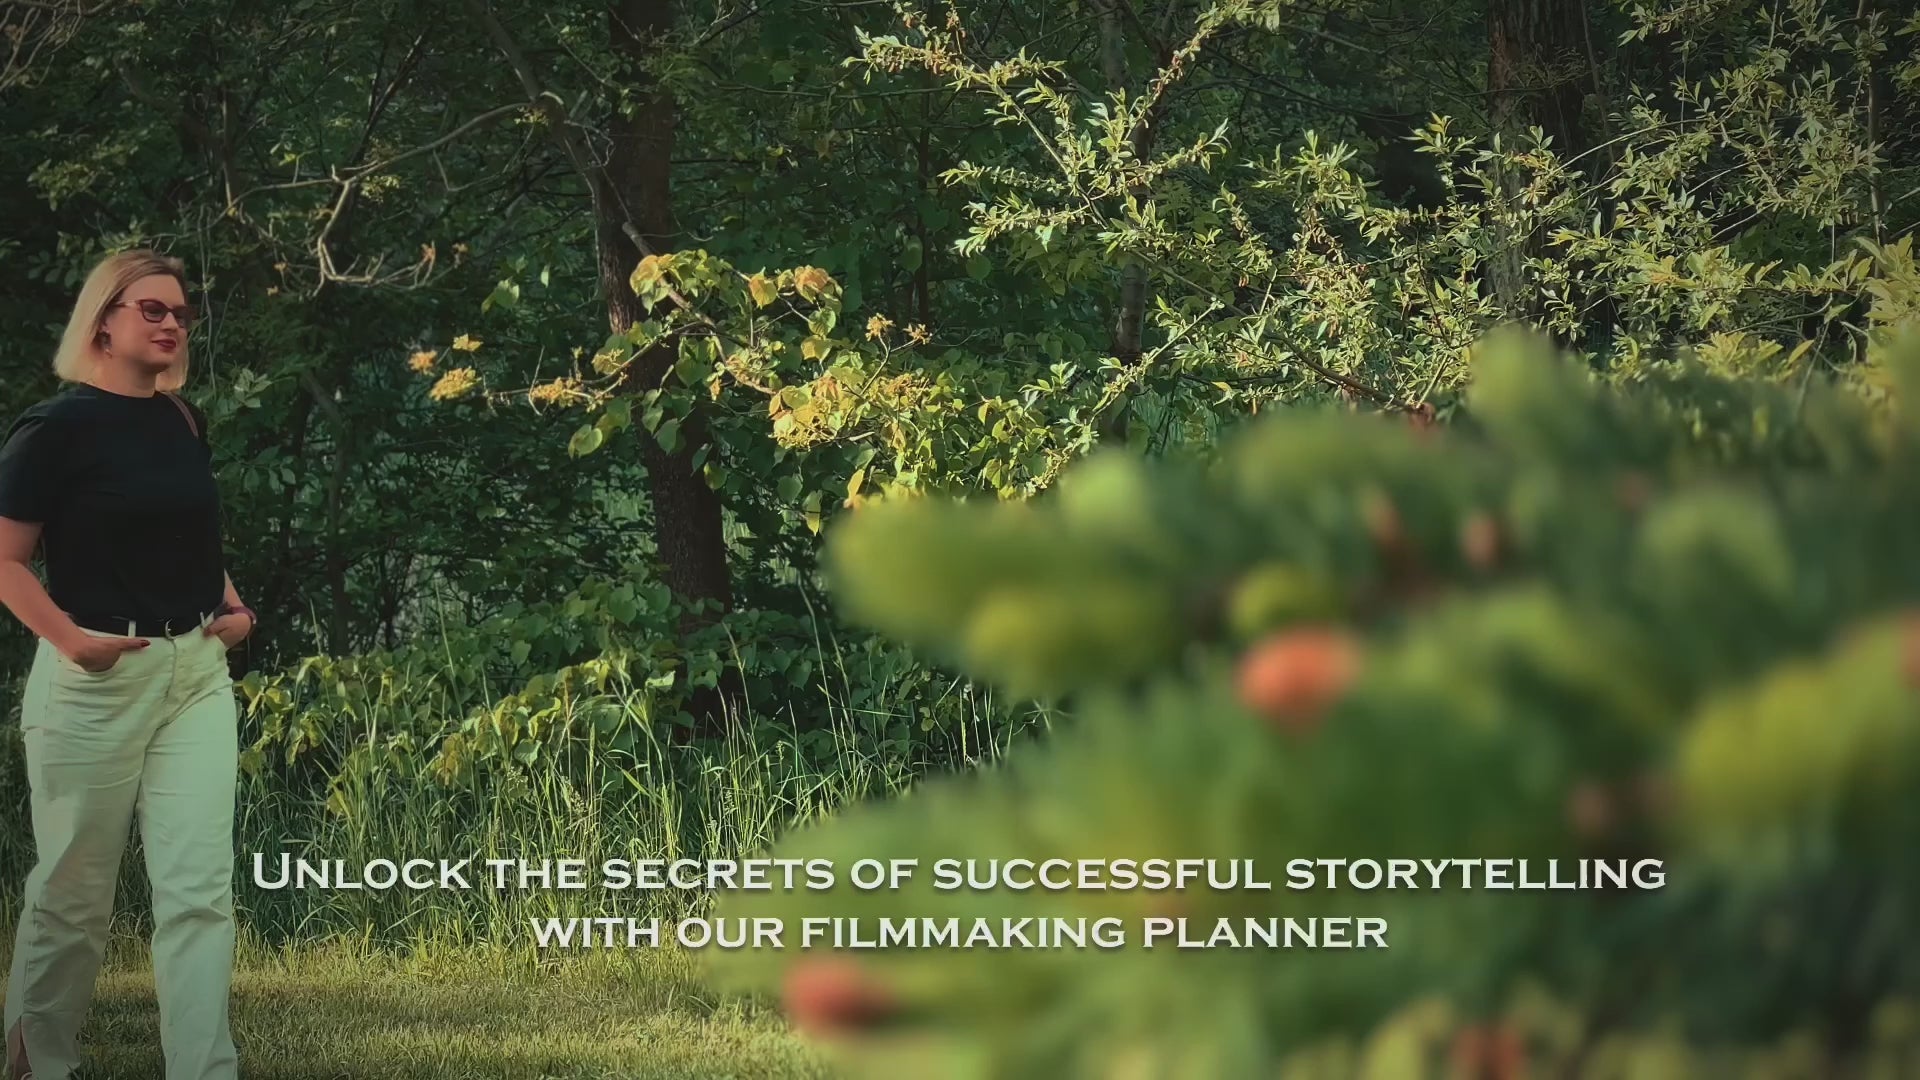 Load video: Filmmaking Planner advert by filmmaker Tina, walking in the park at a picnic and writing in her filmmaking planner. 